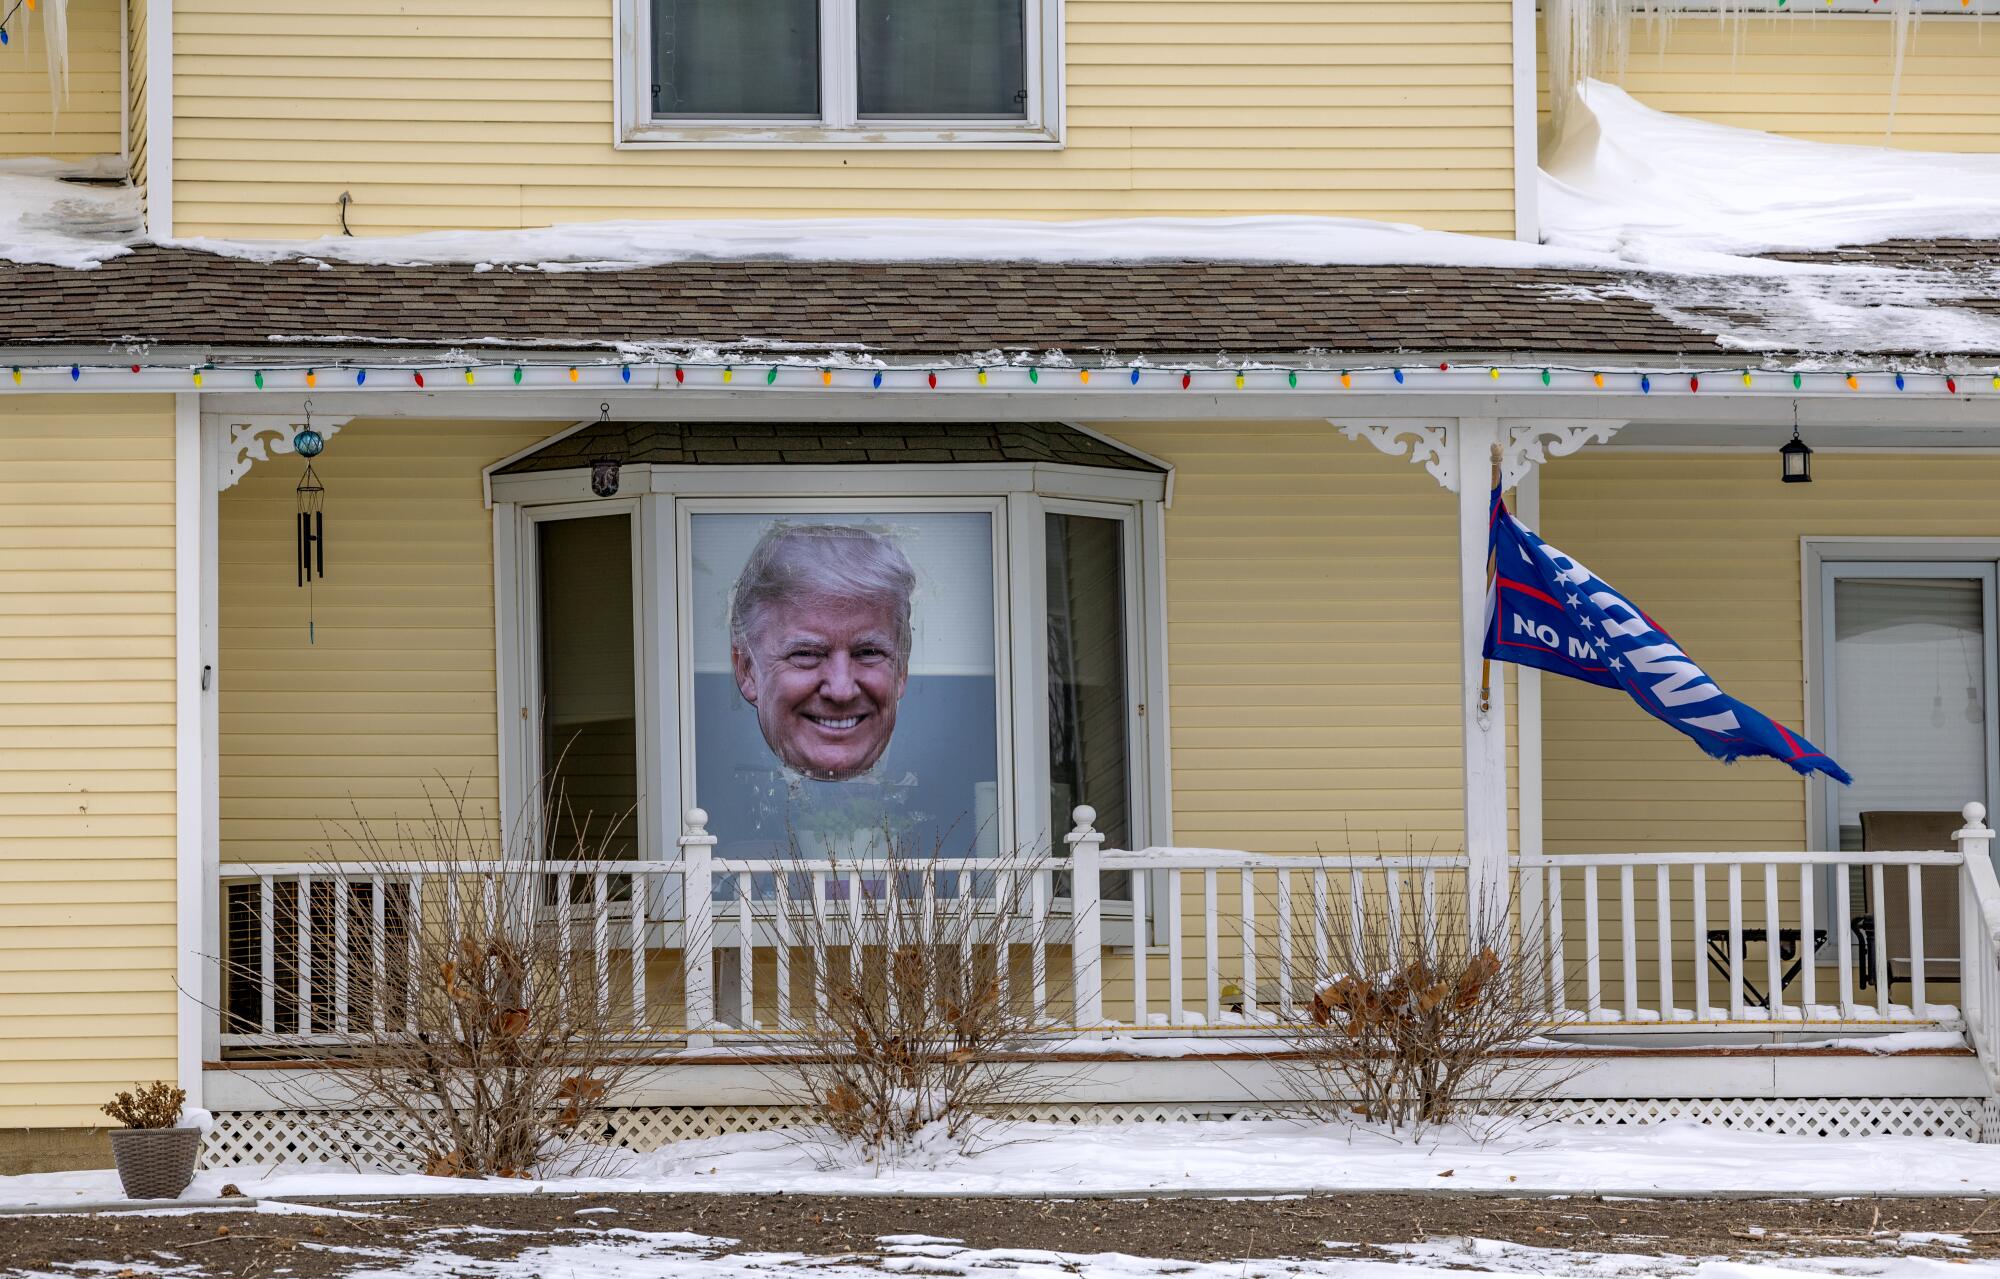 An image of Donald Trump in the front window of a home in Denison.